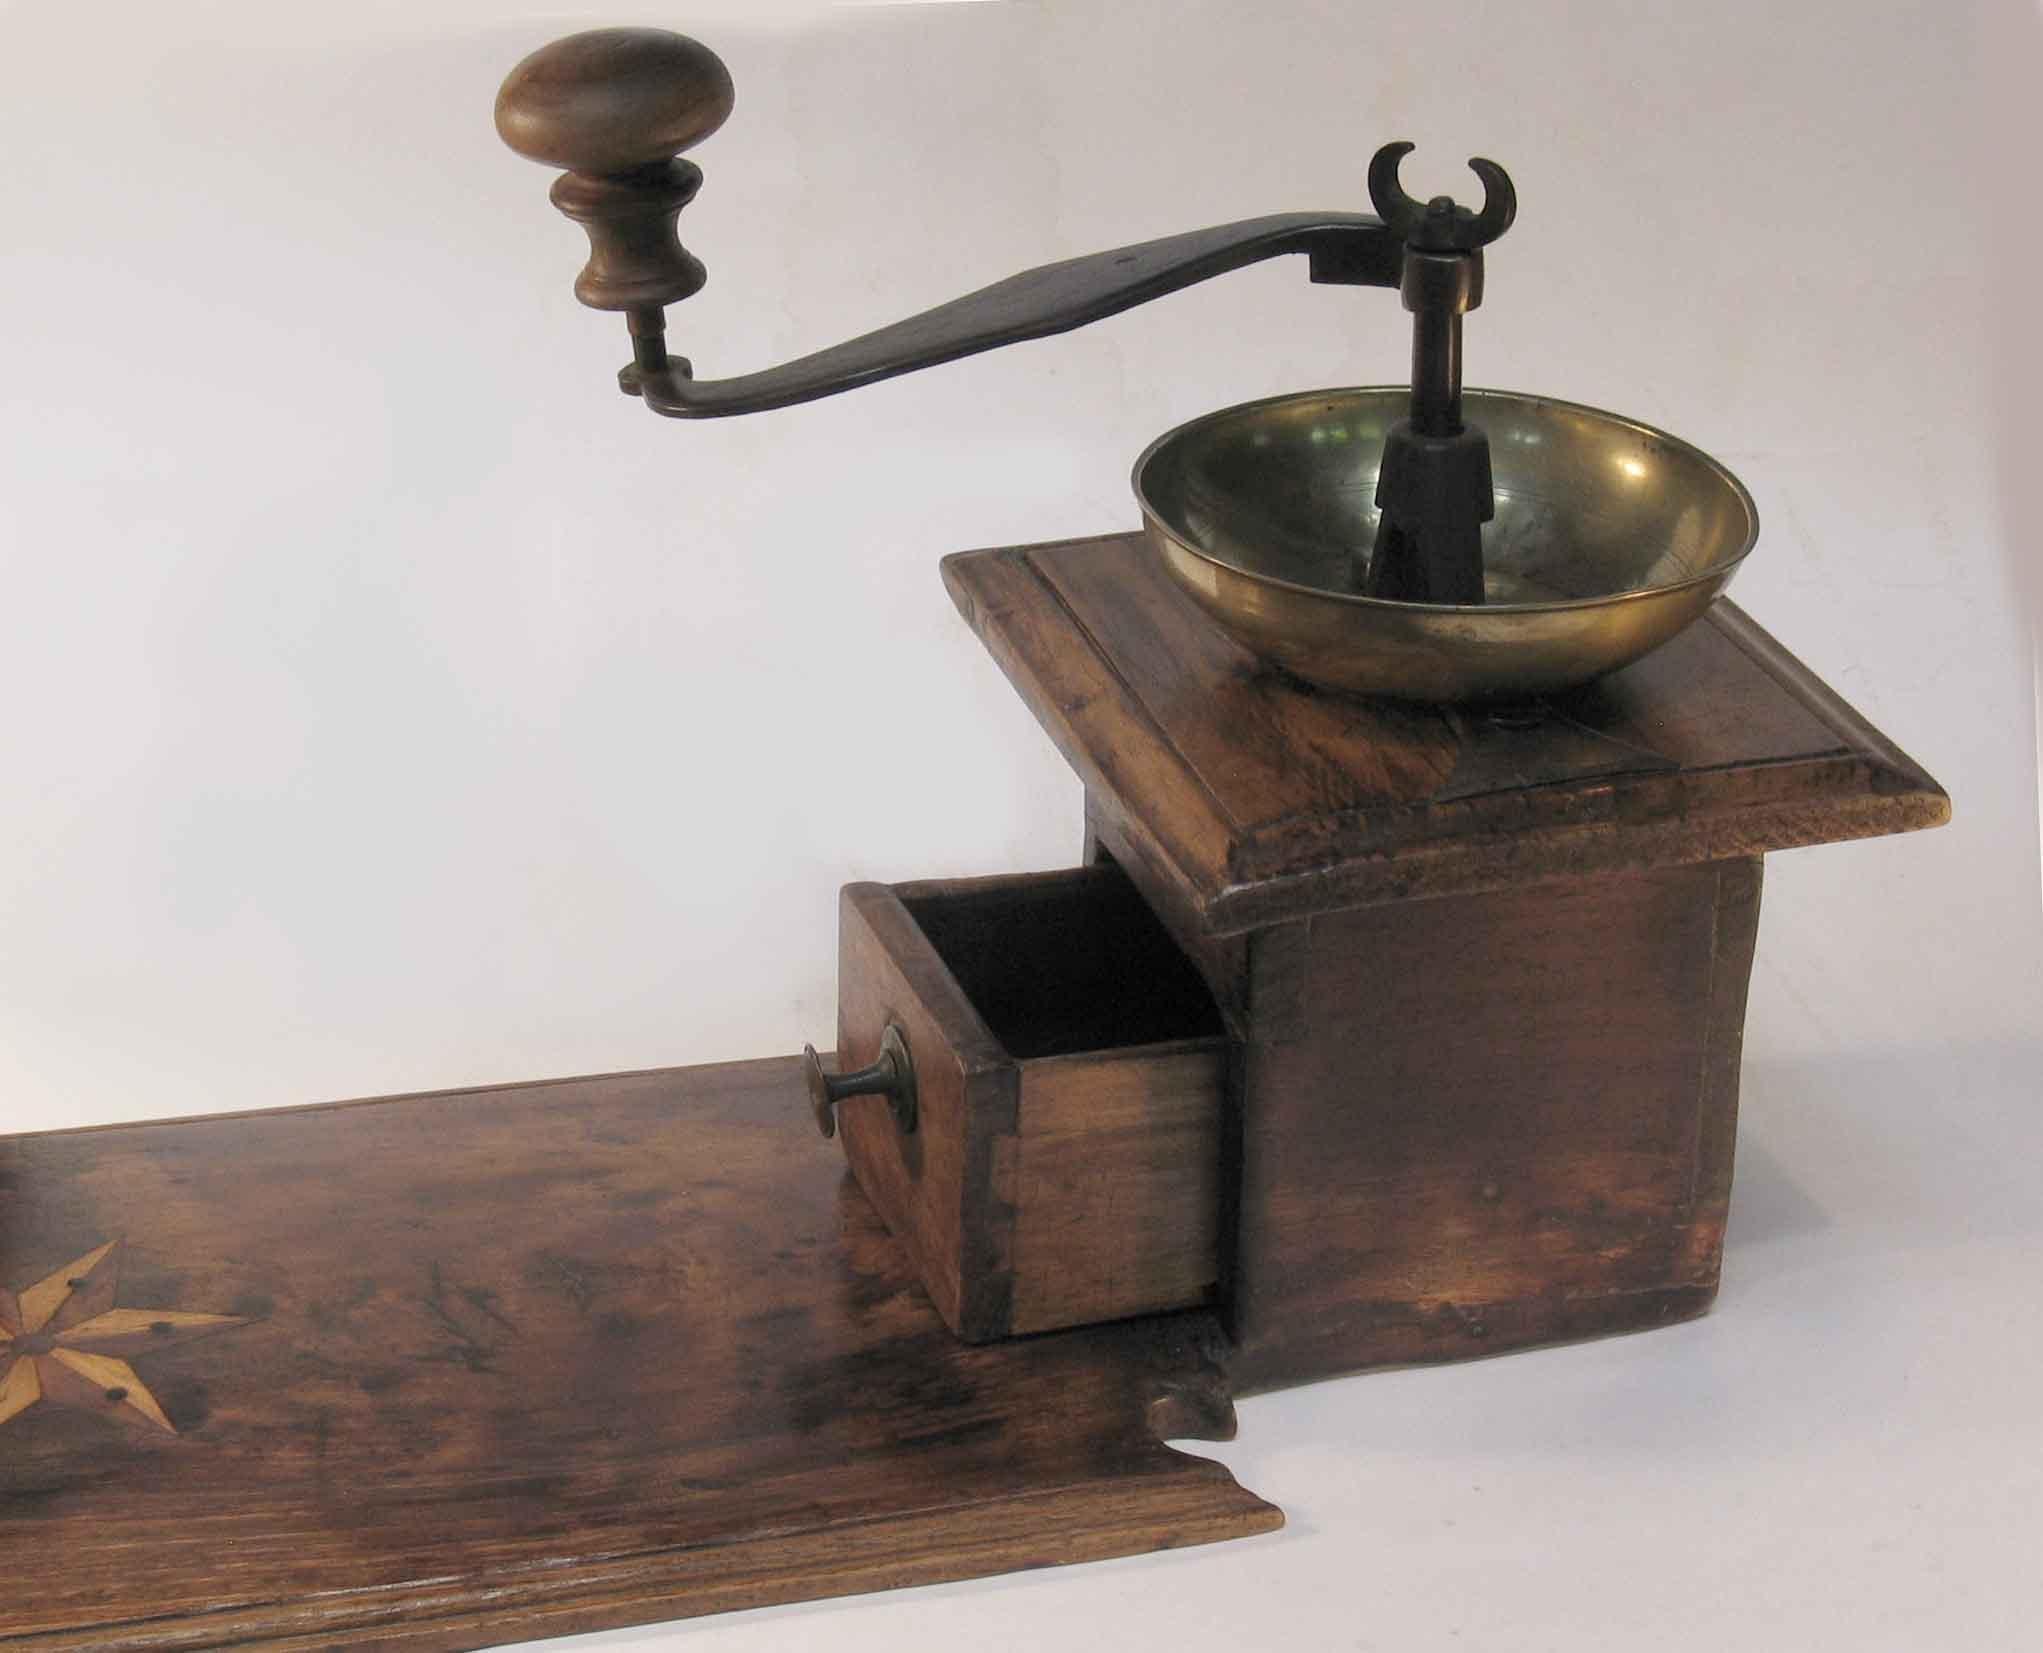 Rare Large Turkish Ottoman Fruitwood Hand Crank Coffee Grinder  In Good Condition For Sale In Ottawa, Ontario